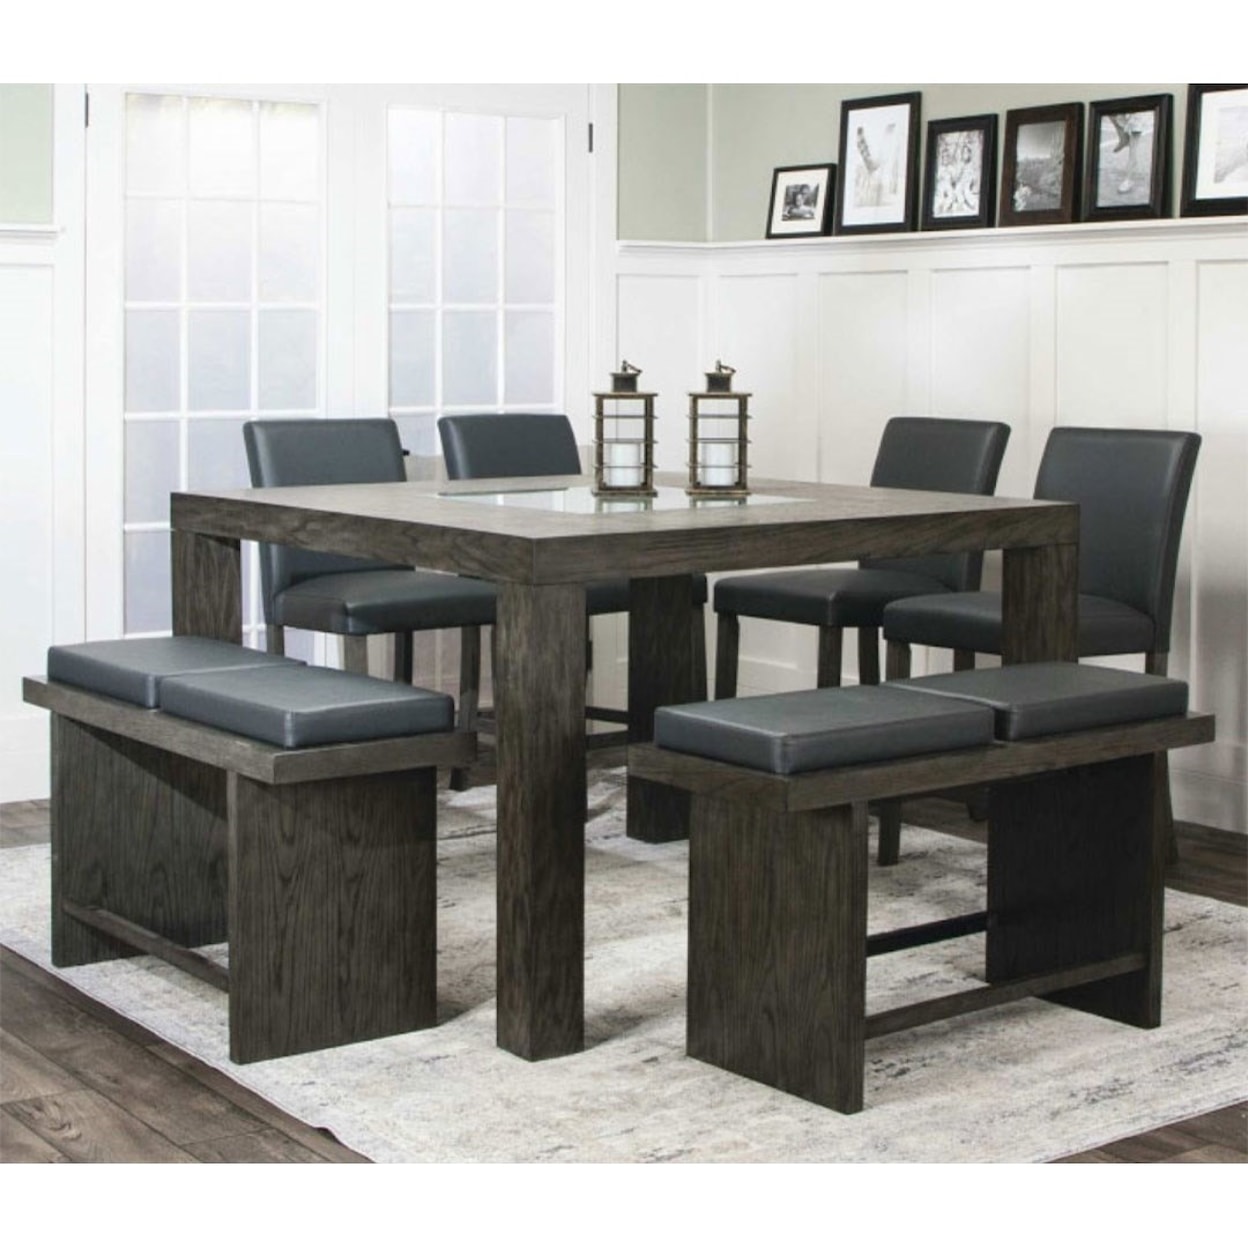 Cramco, Inc Cougar 7pc Dining Room Group